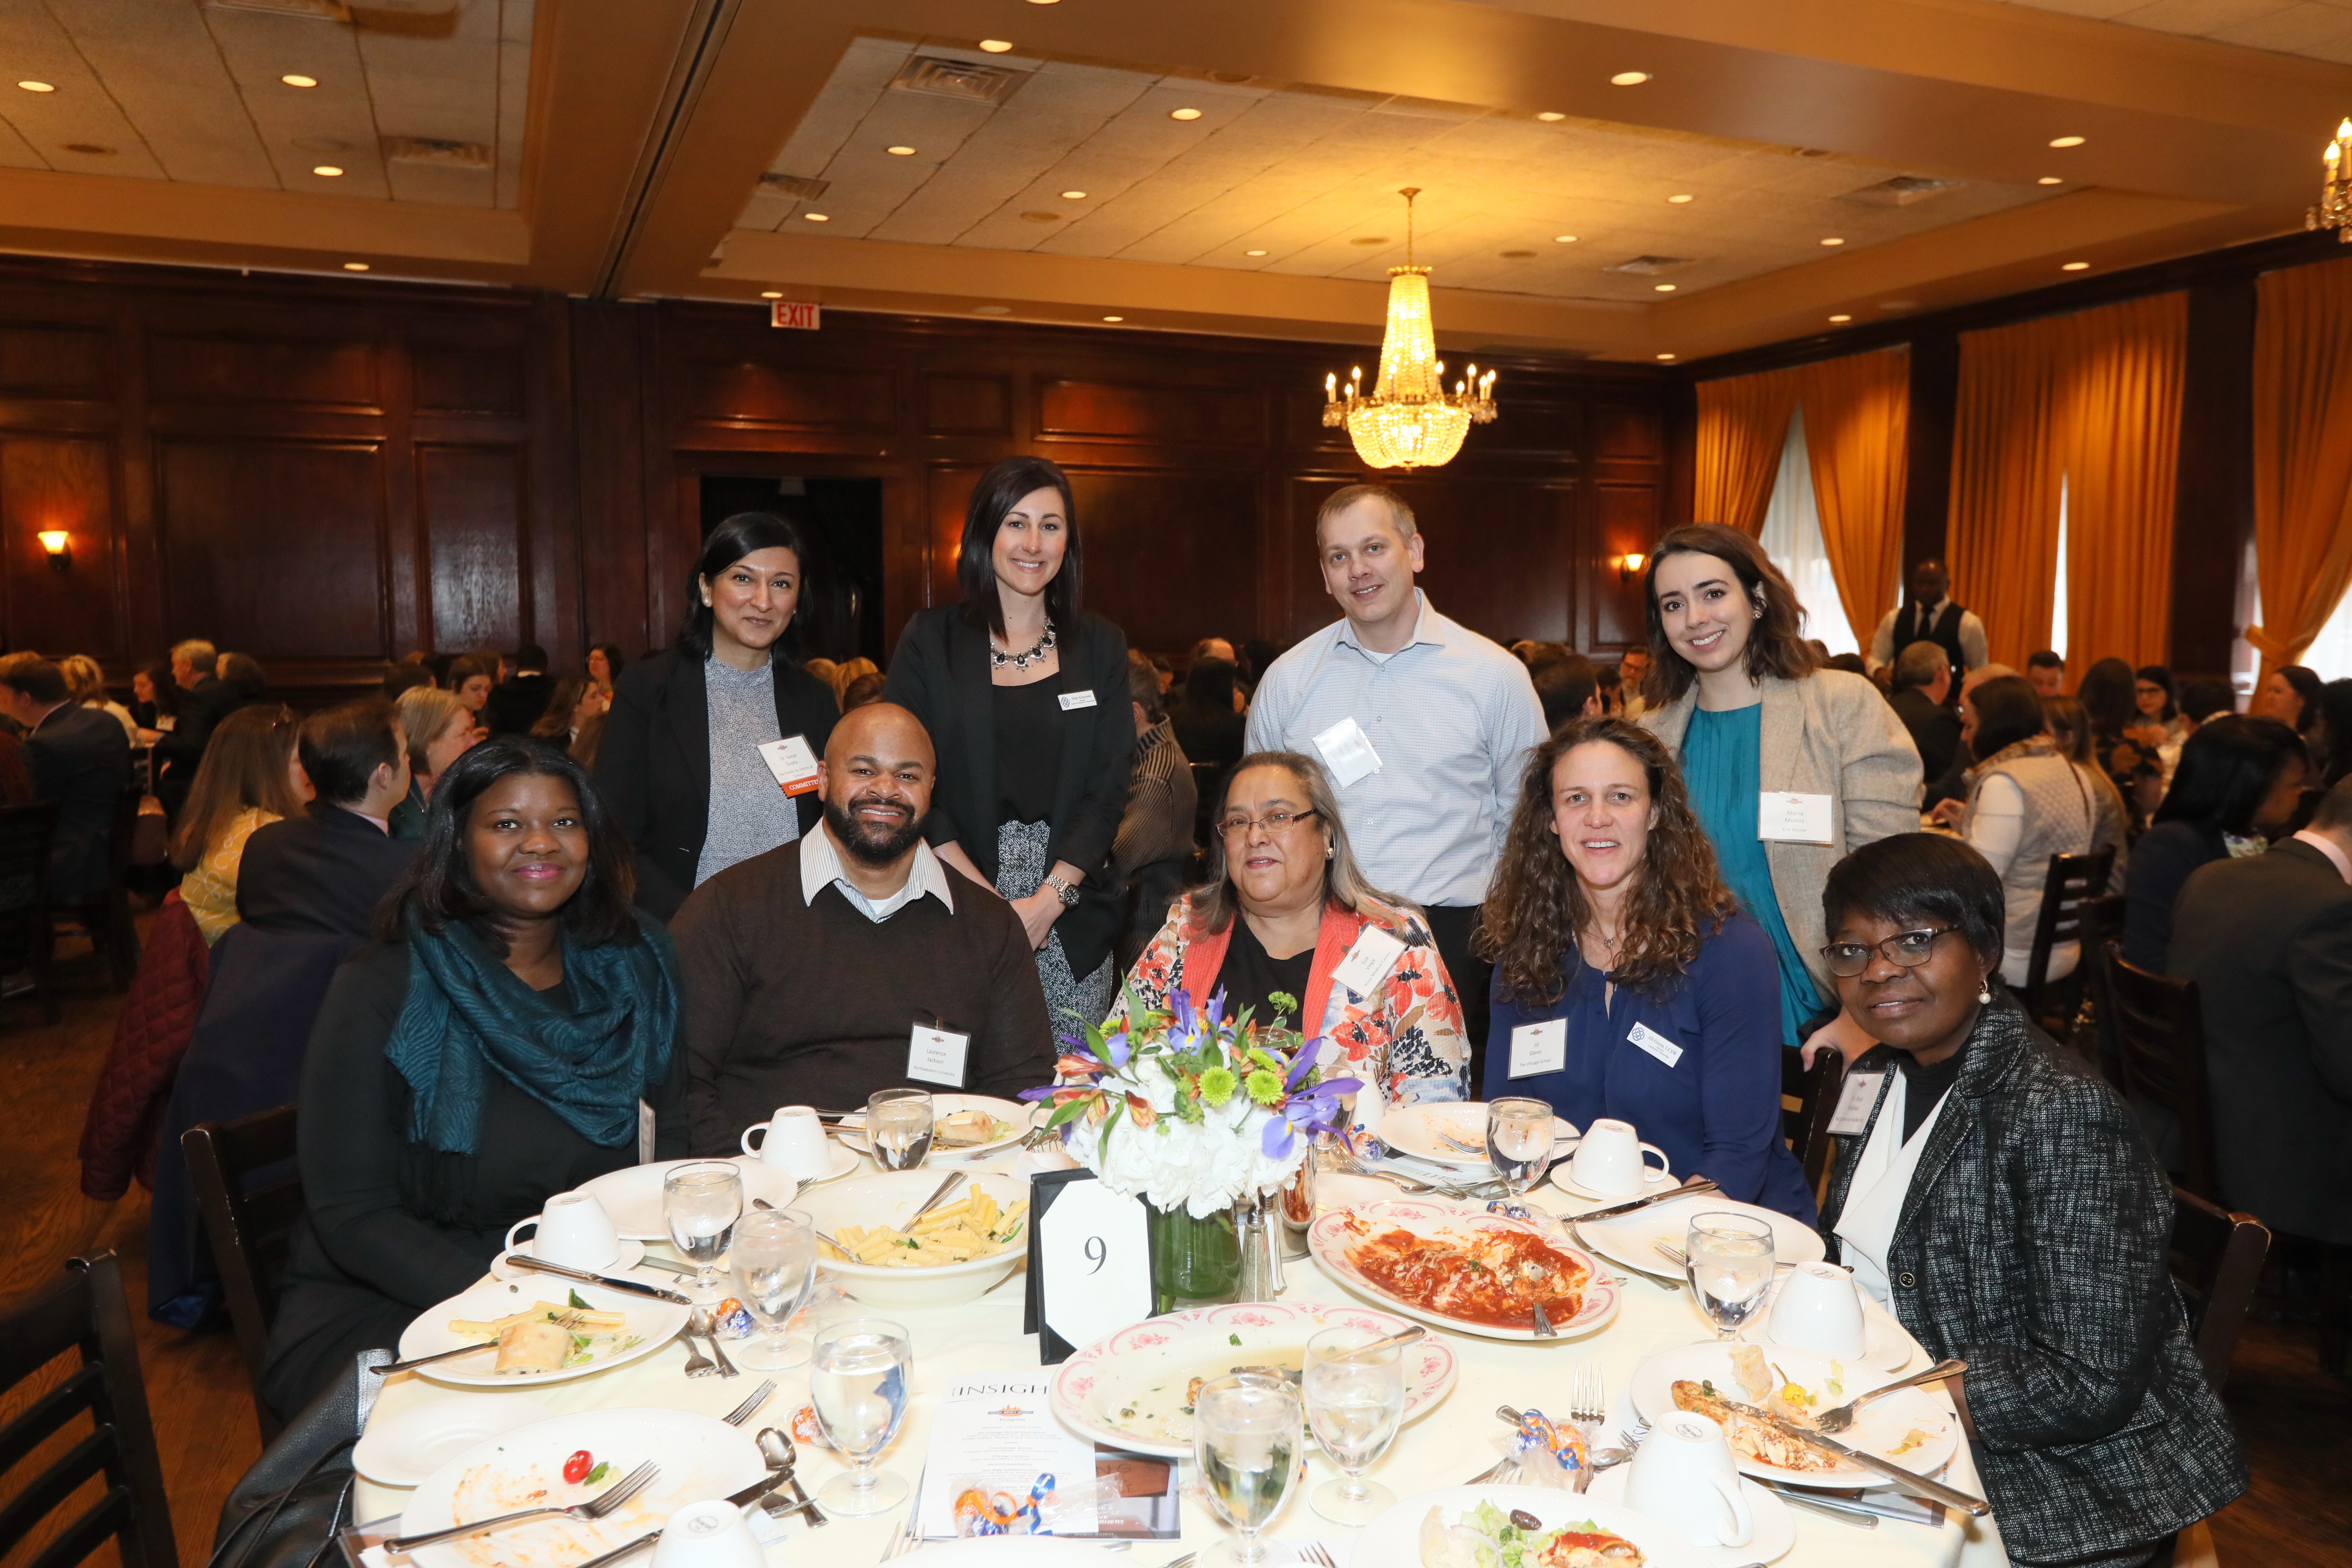  - The Social Impact Awards Luncheon 2019, Community Partnerships Table with The Community Builders Inc, Erie House, White Crane, and Alivio.